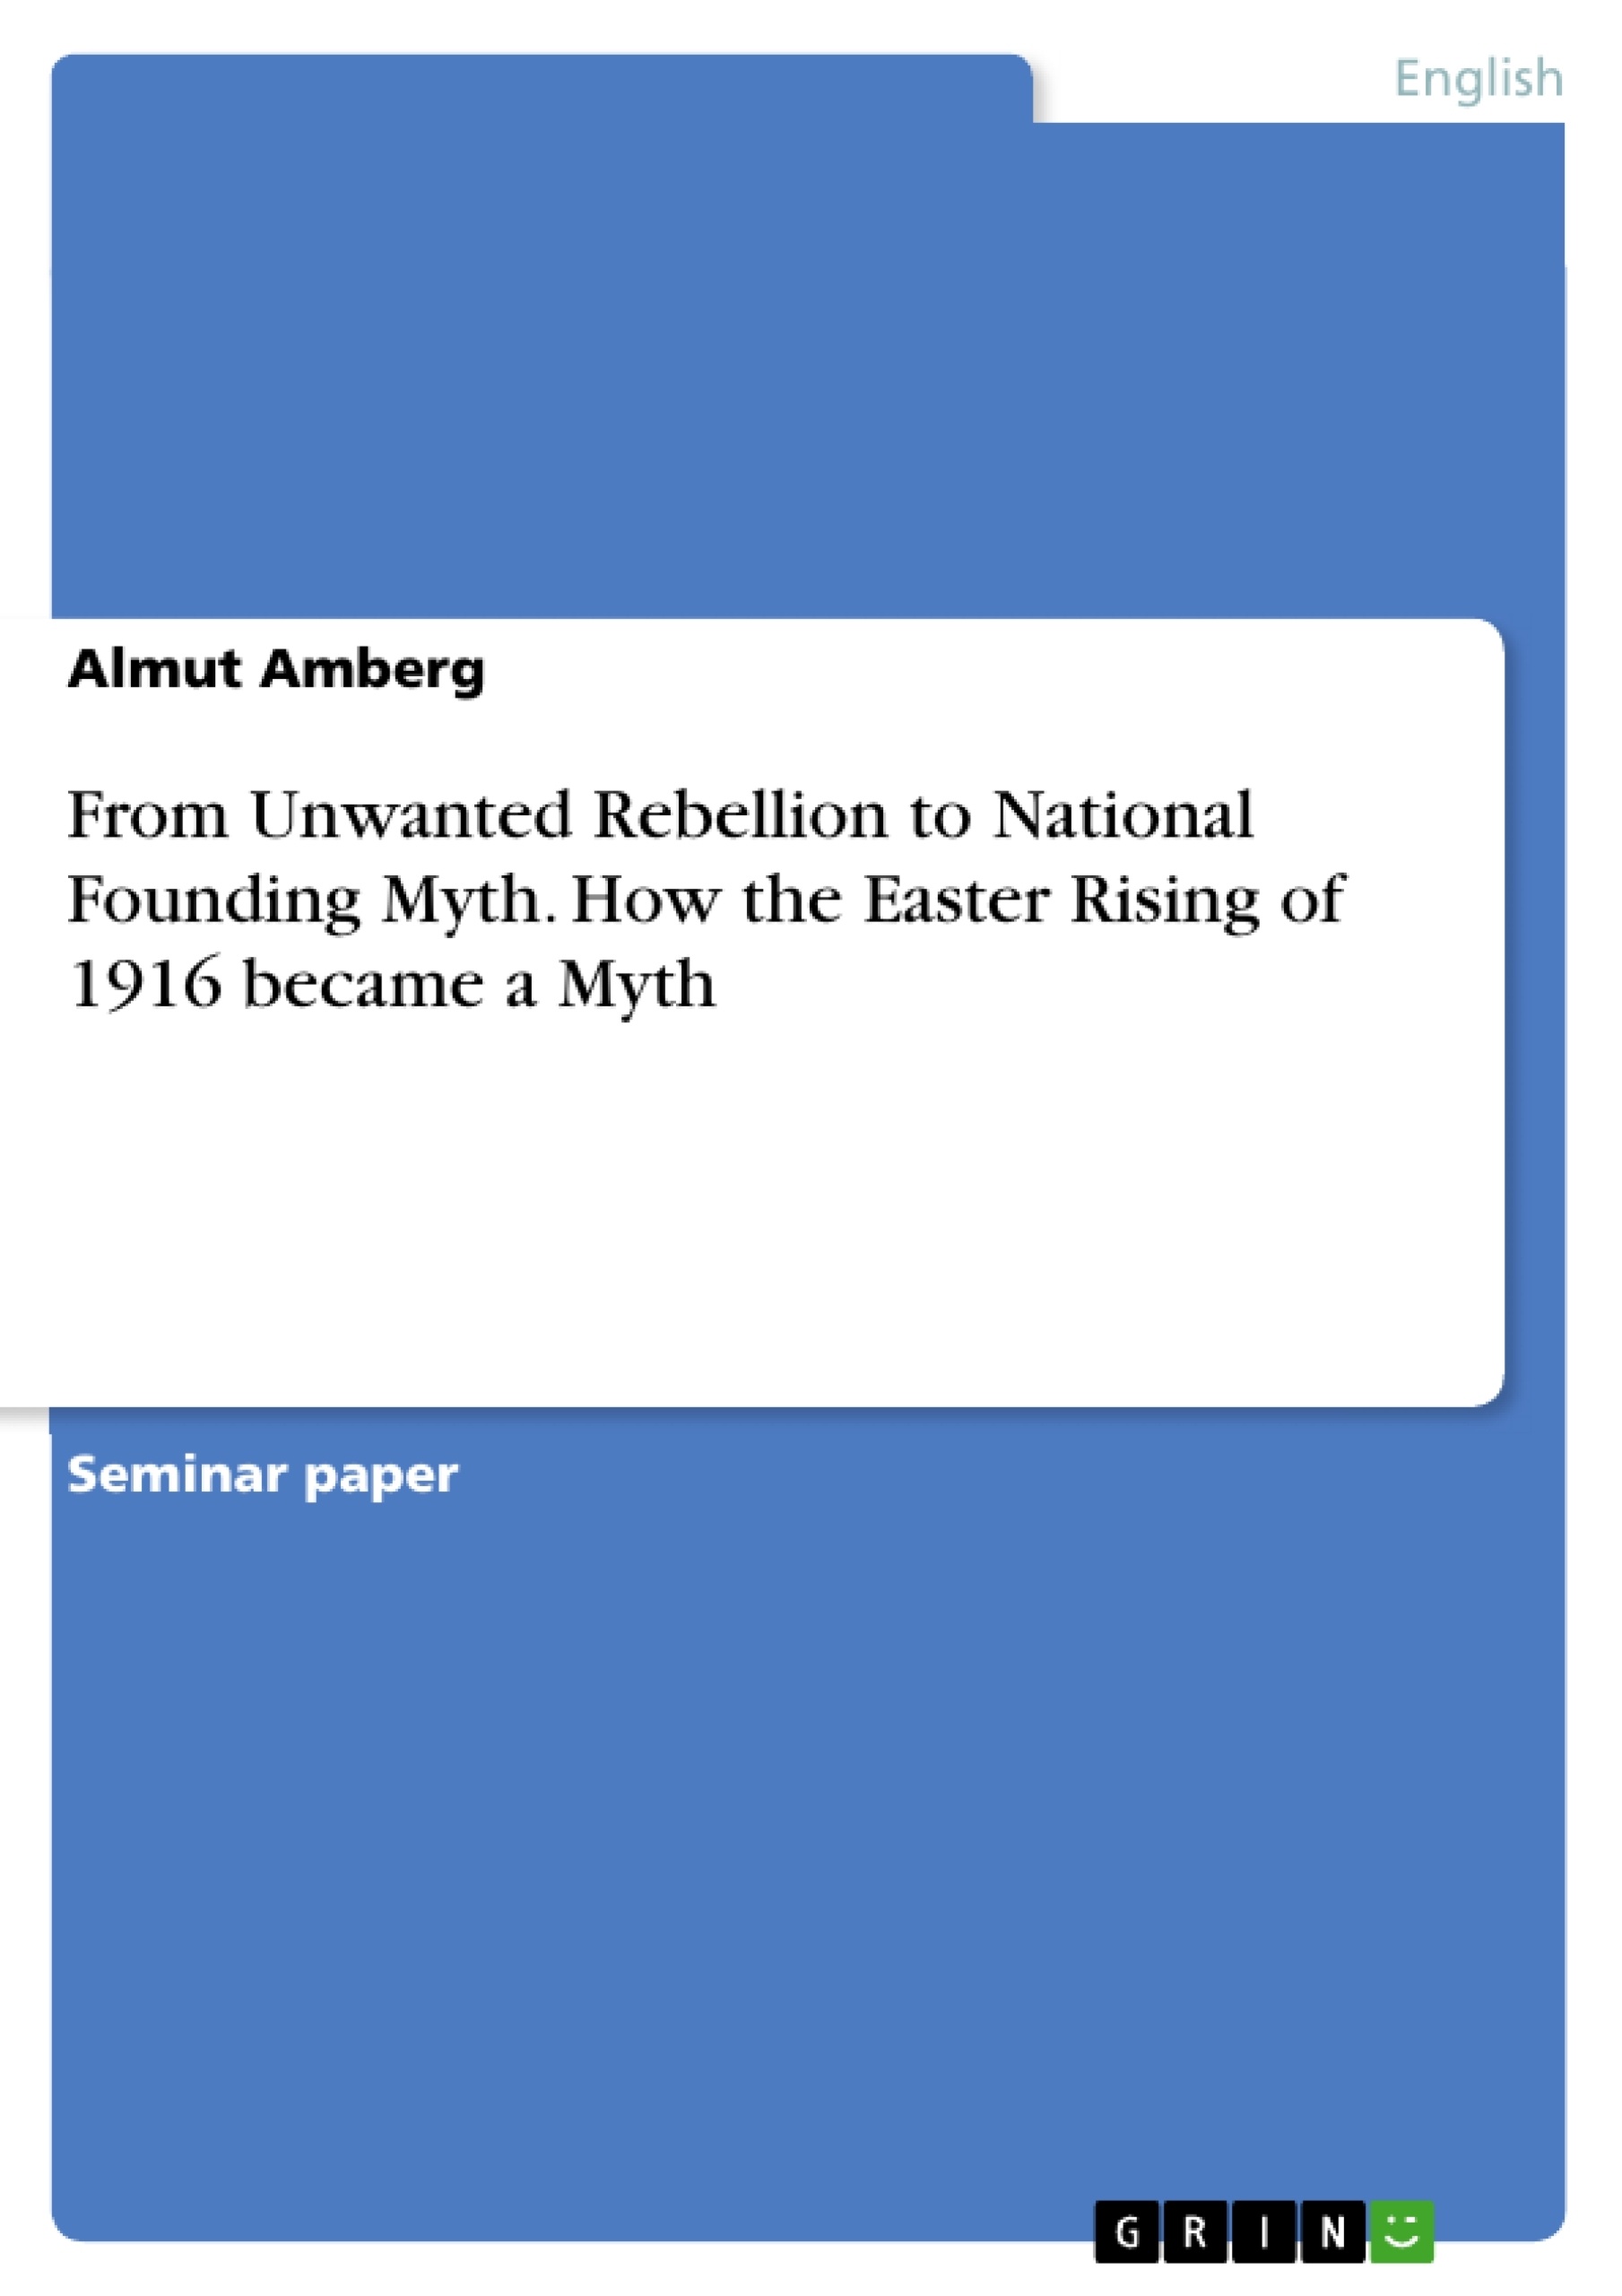 Titre: From Unwanted Rebellion to National Founding Myth. How the Easter Rising of 1916 became a Myth